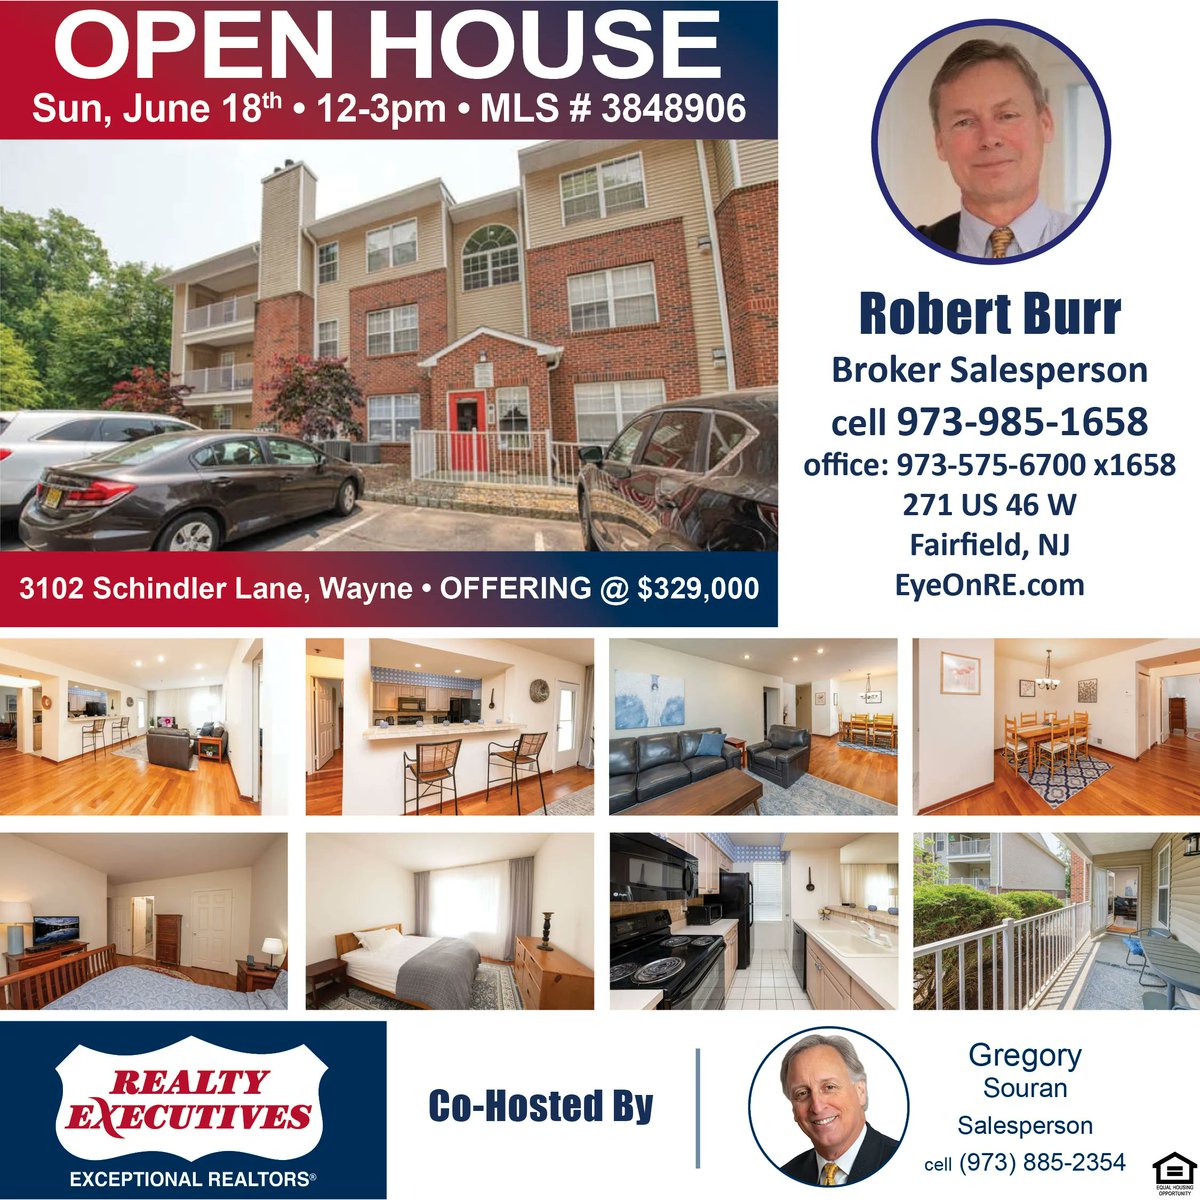 🤩OPEN HOUSE ✏️Sunday, June 18th 🕰12pm - 3pm 🚗3102 Schindler Ln, Wayne, NJ 🏠Spacious and bright condo featuring hardwood floors with warmth and elegance! #openhouse #waynenj #condo #walkincloset #coveredpatio #centralair #garage